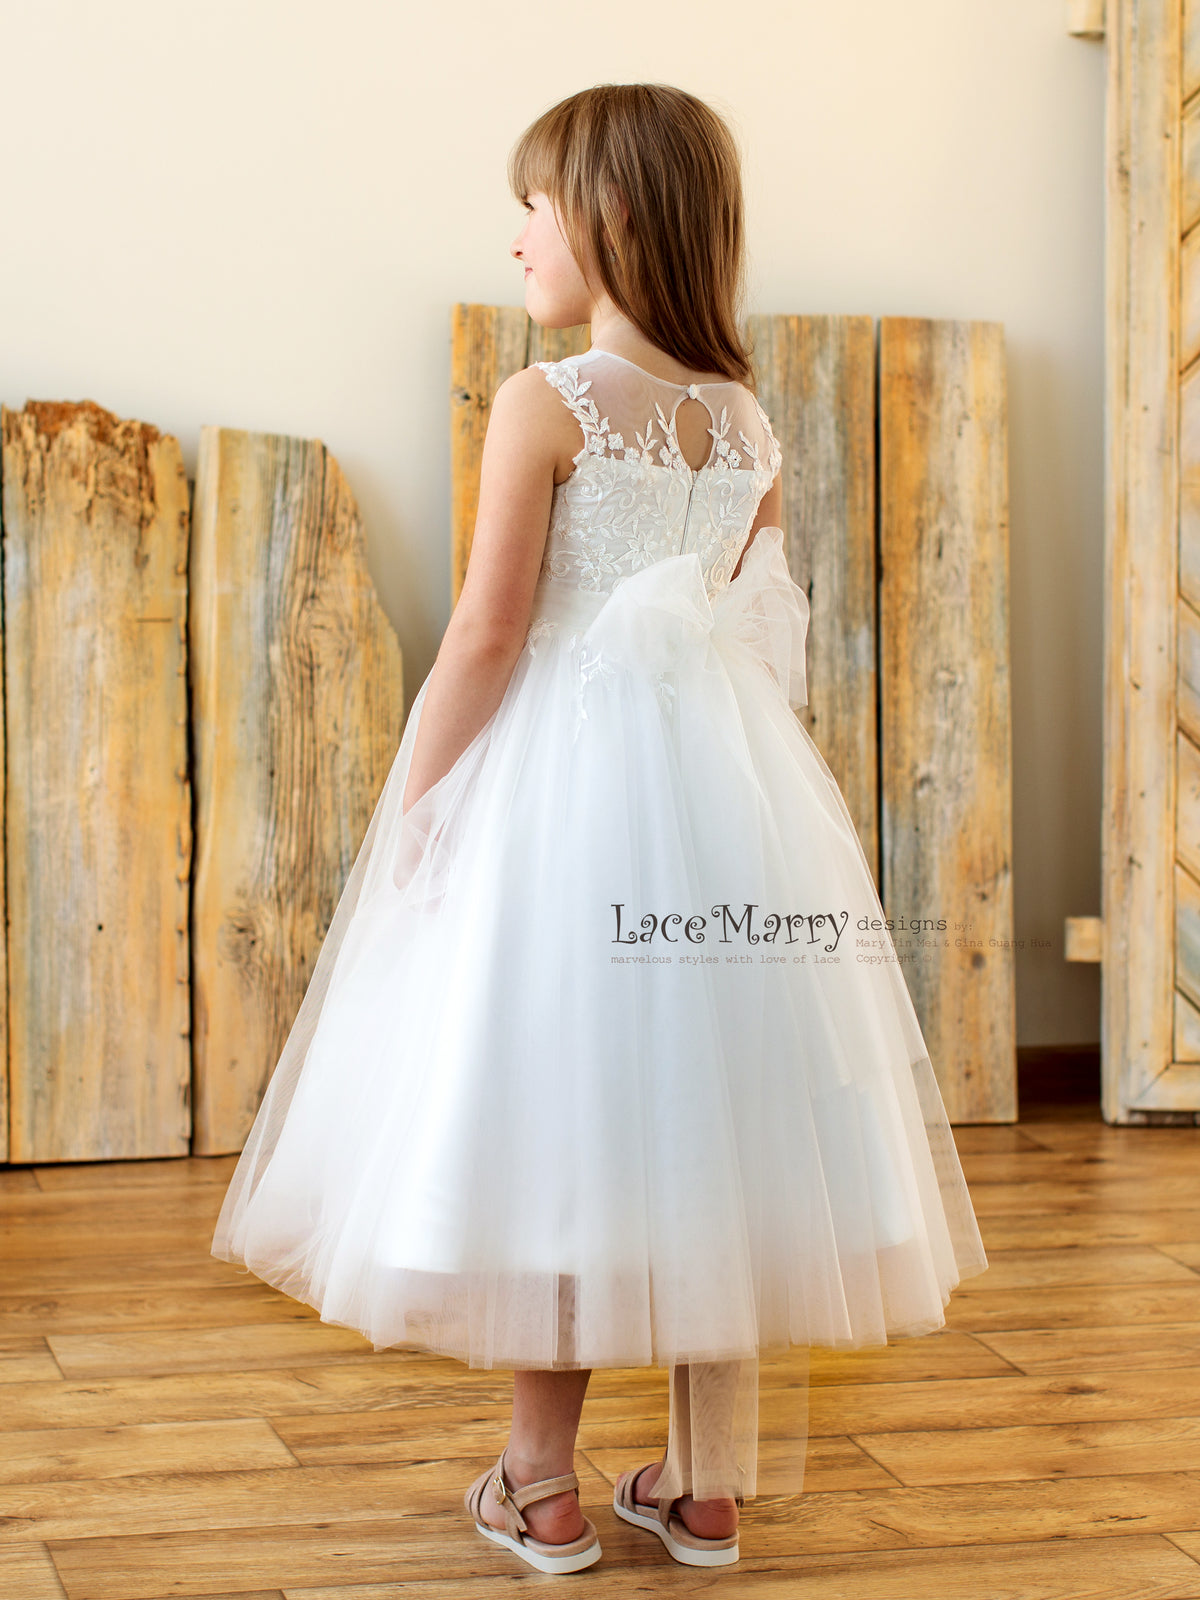 Lace Flower Girl Dress with Big Bow